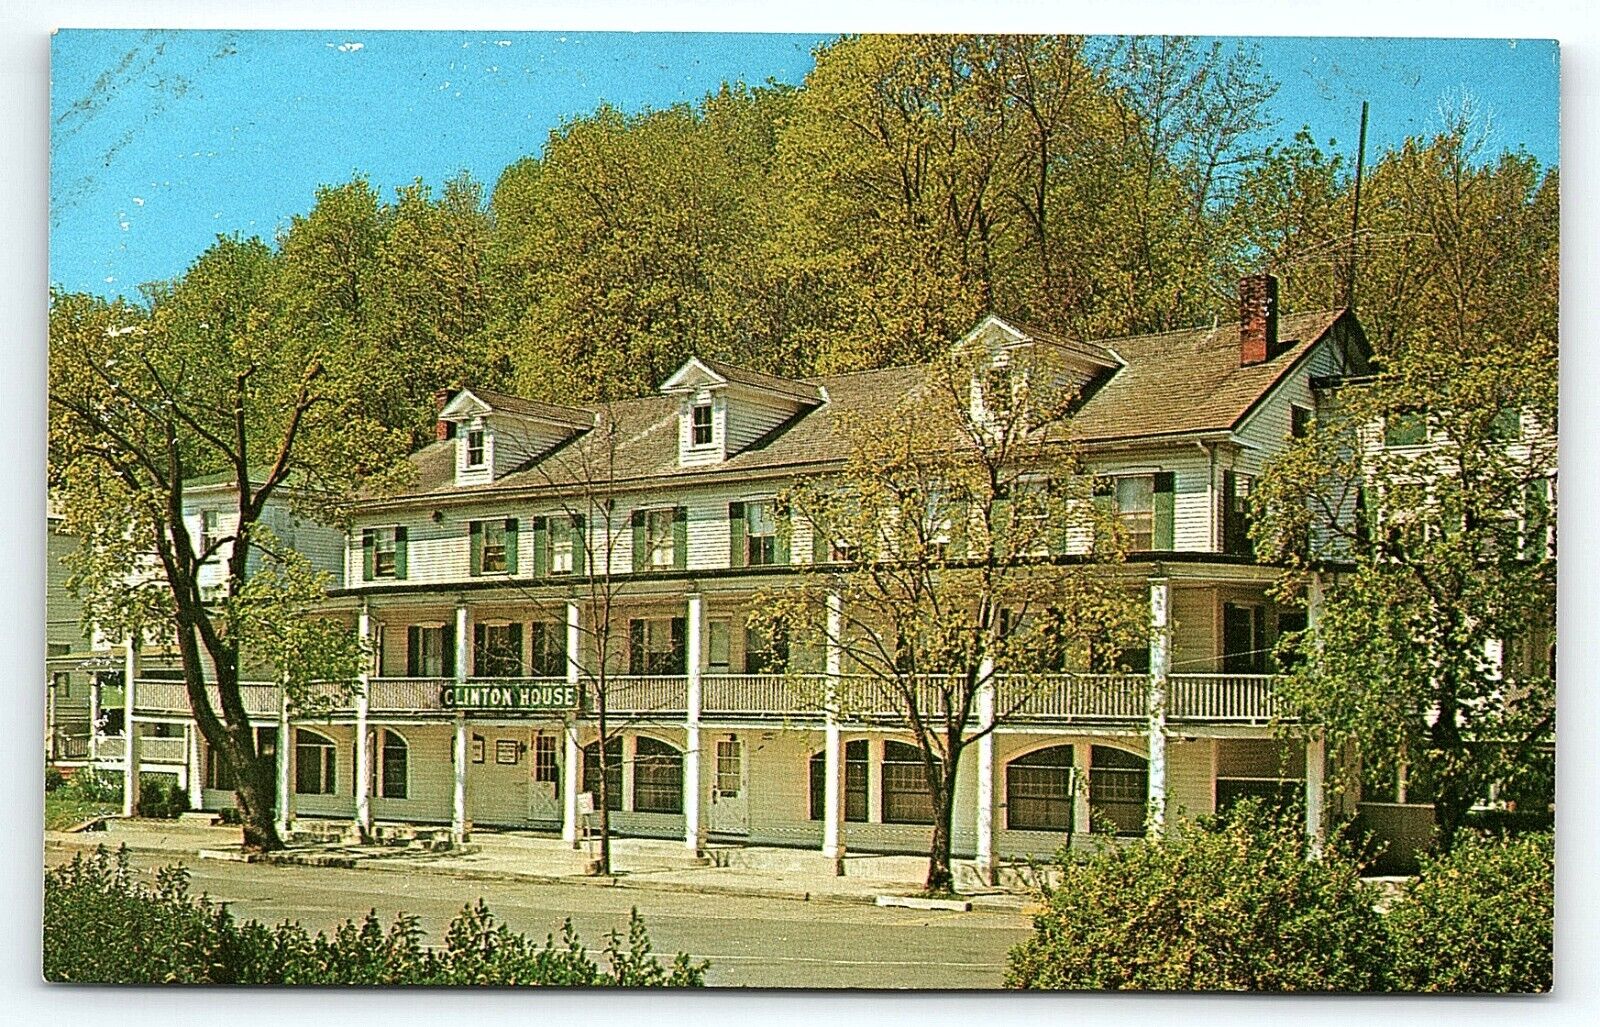 1960s CLINTON NEW JERSEY THE CLINTON HOUSE PRIME BEEF AND SEAFOOD POSTCARD P4914